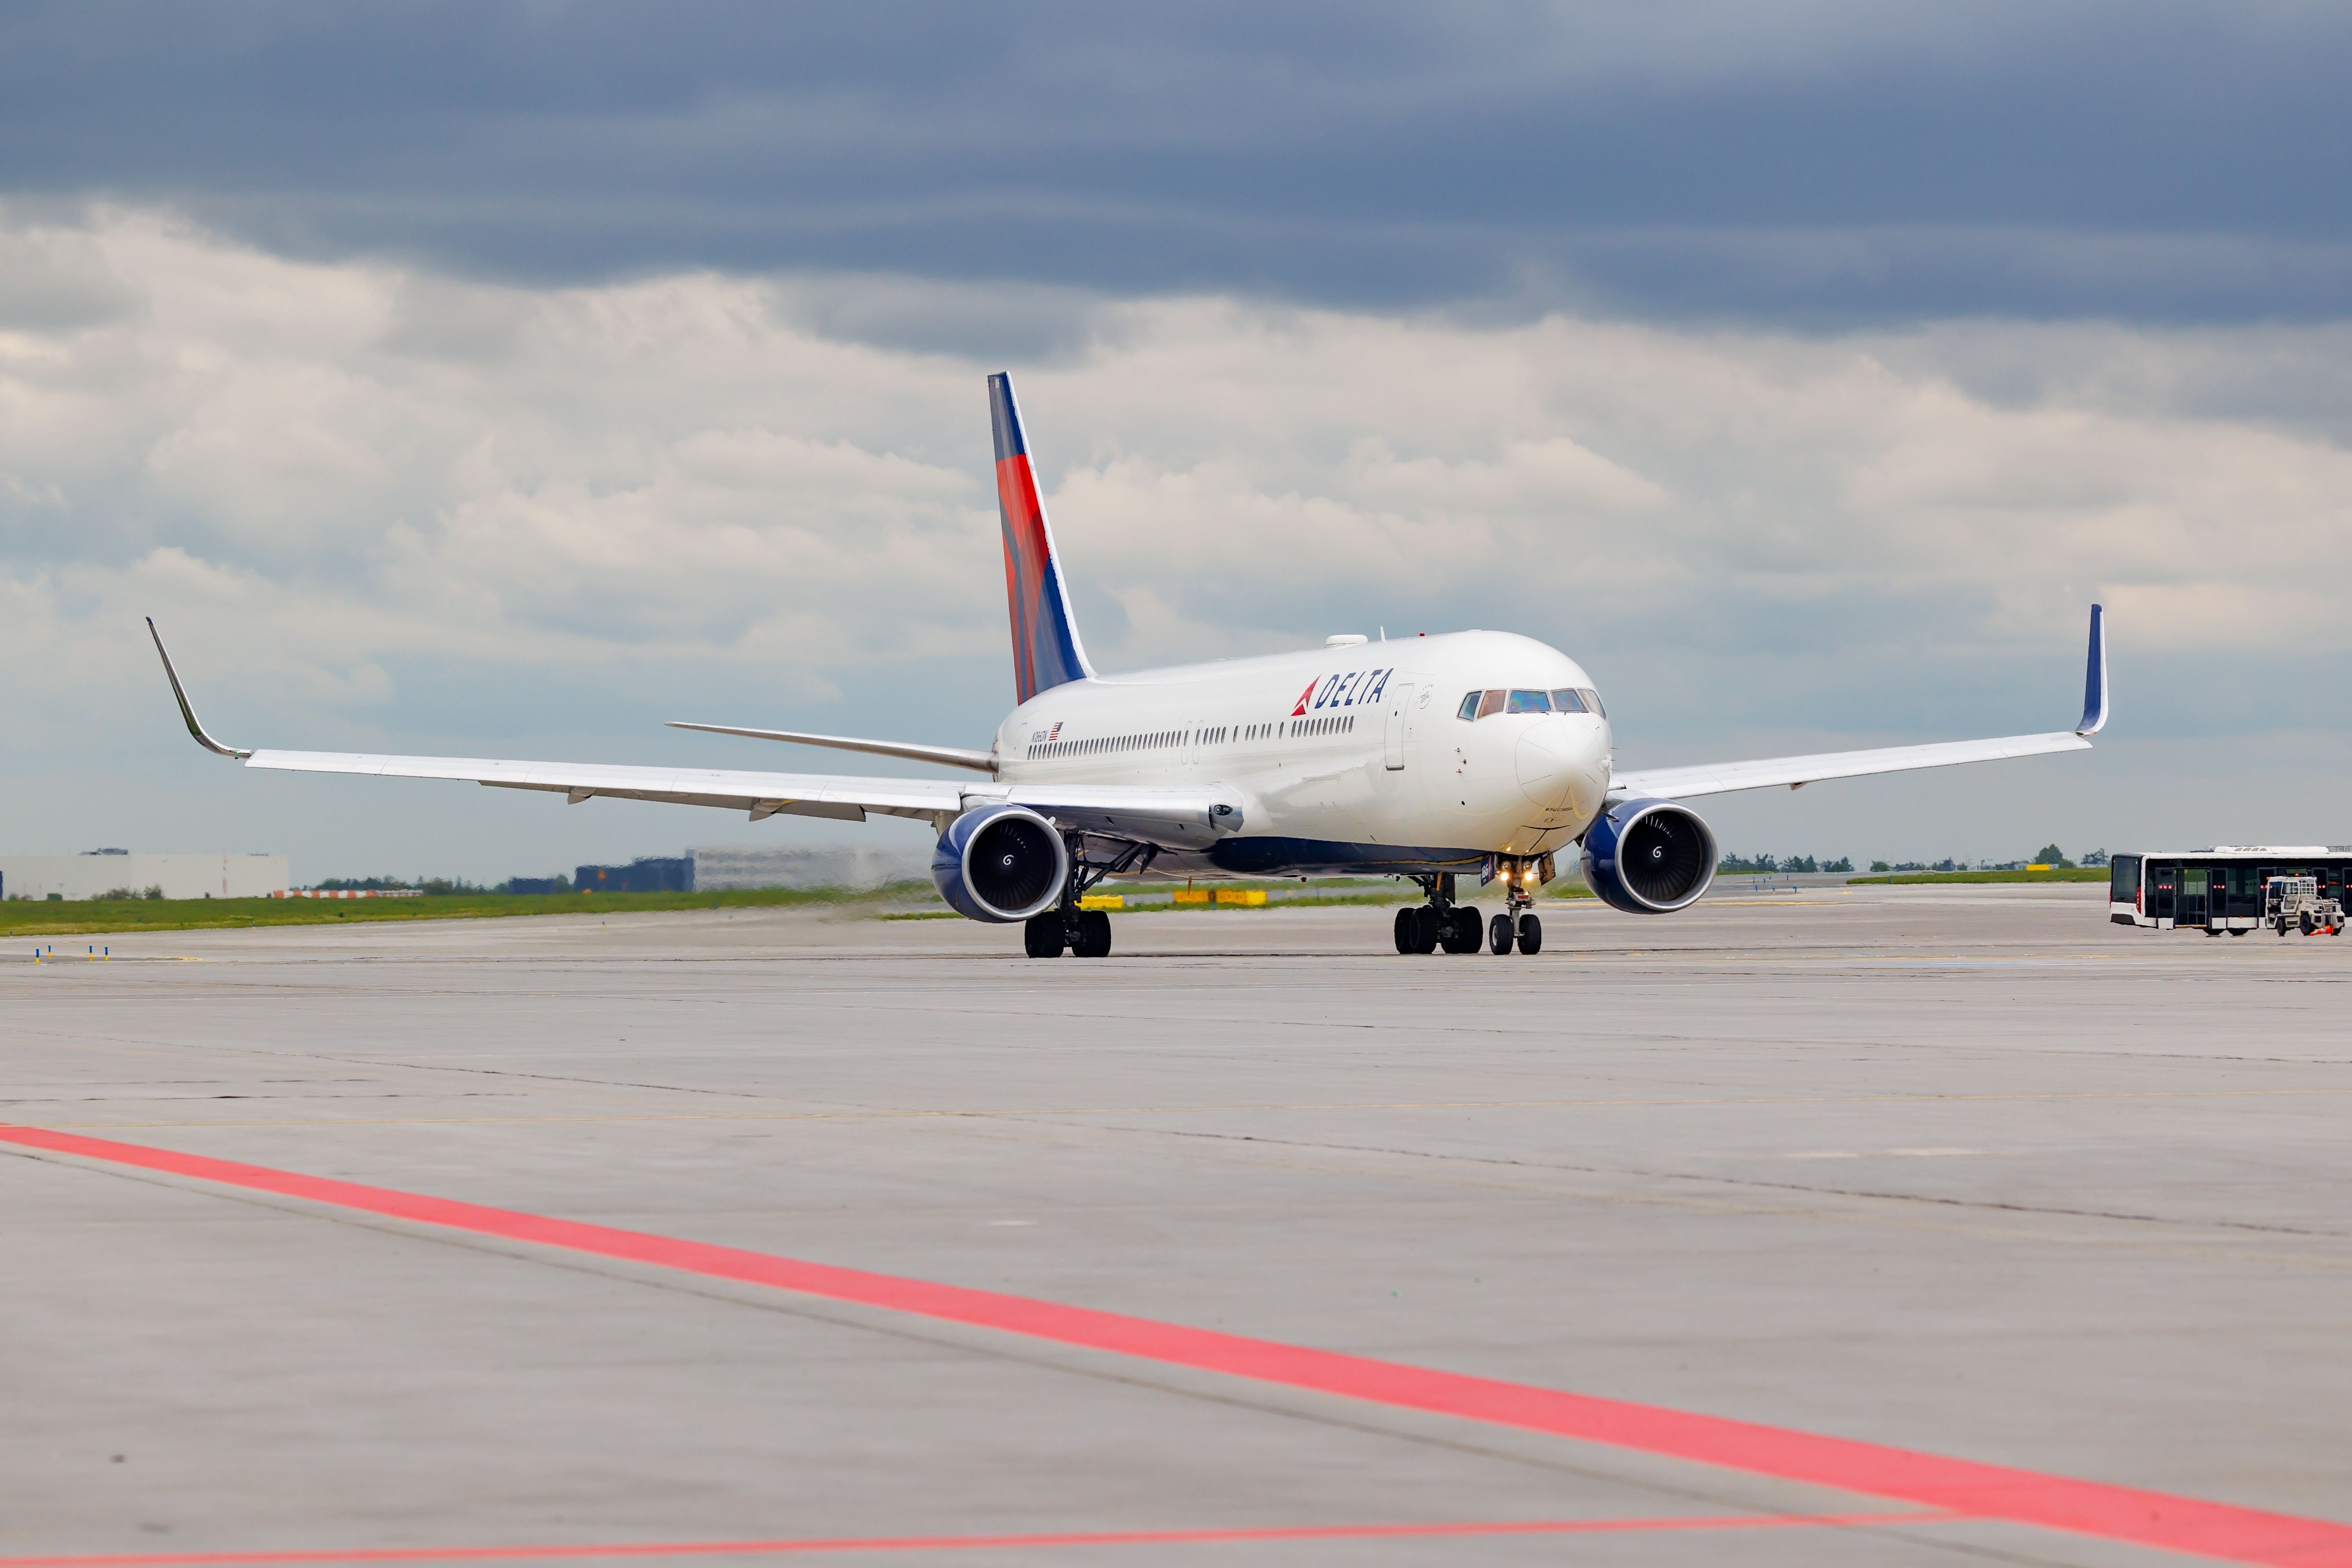 A Delta Boeing 767 taking off